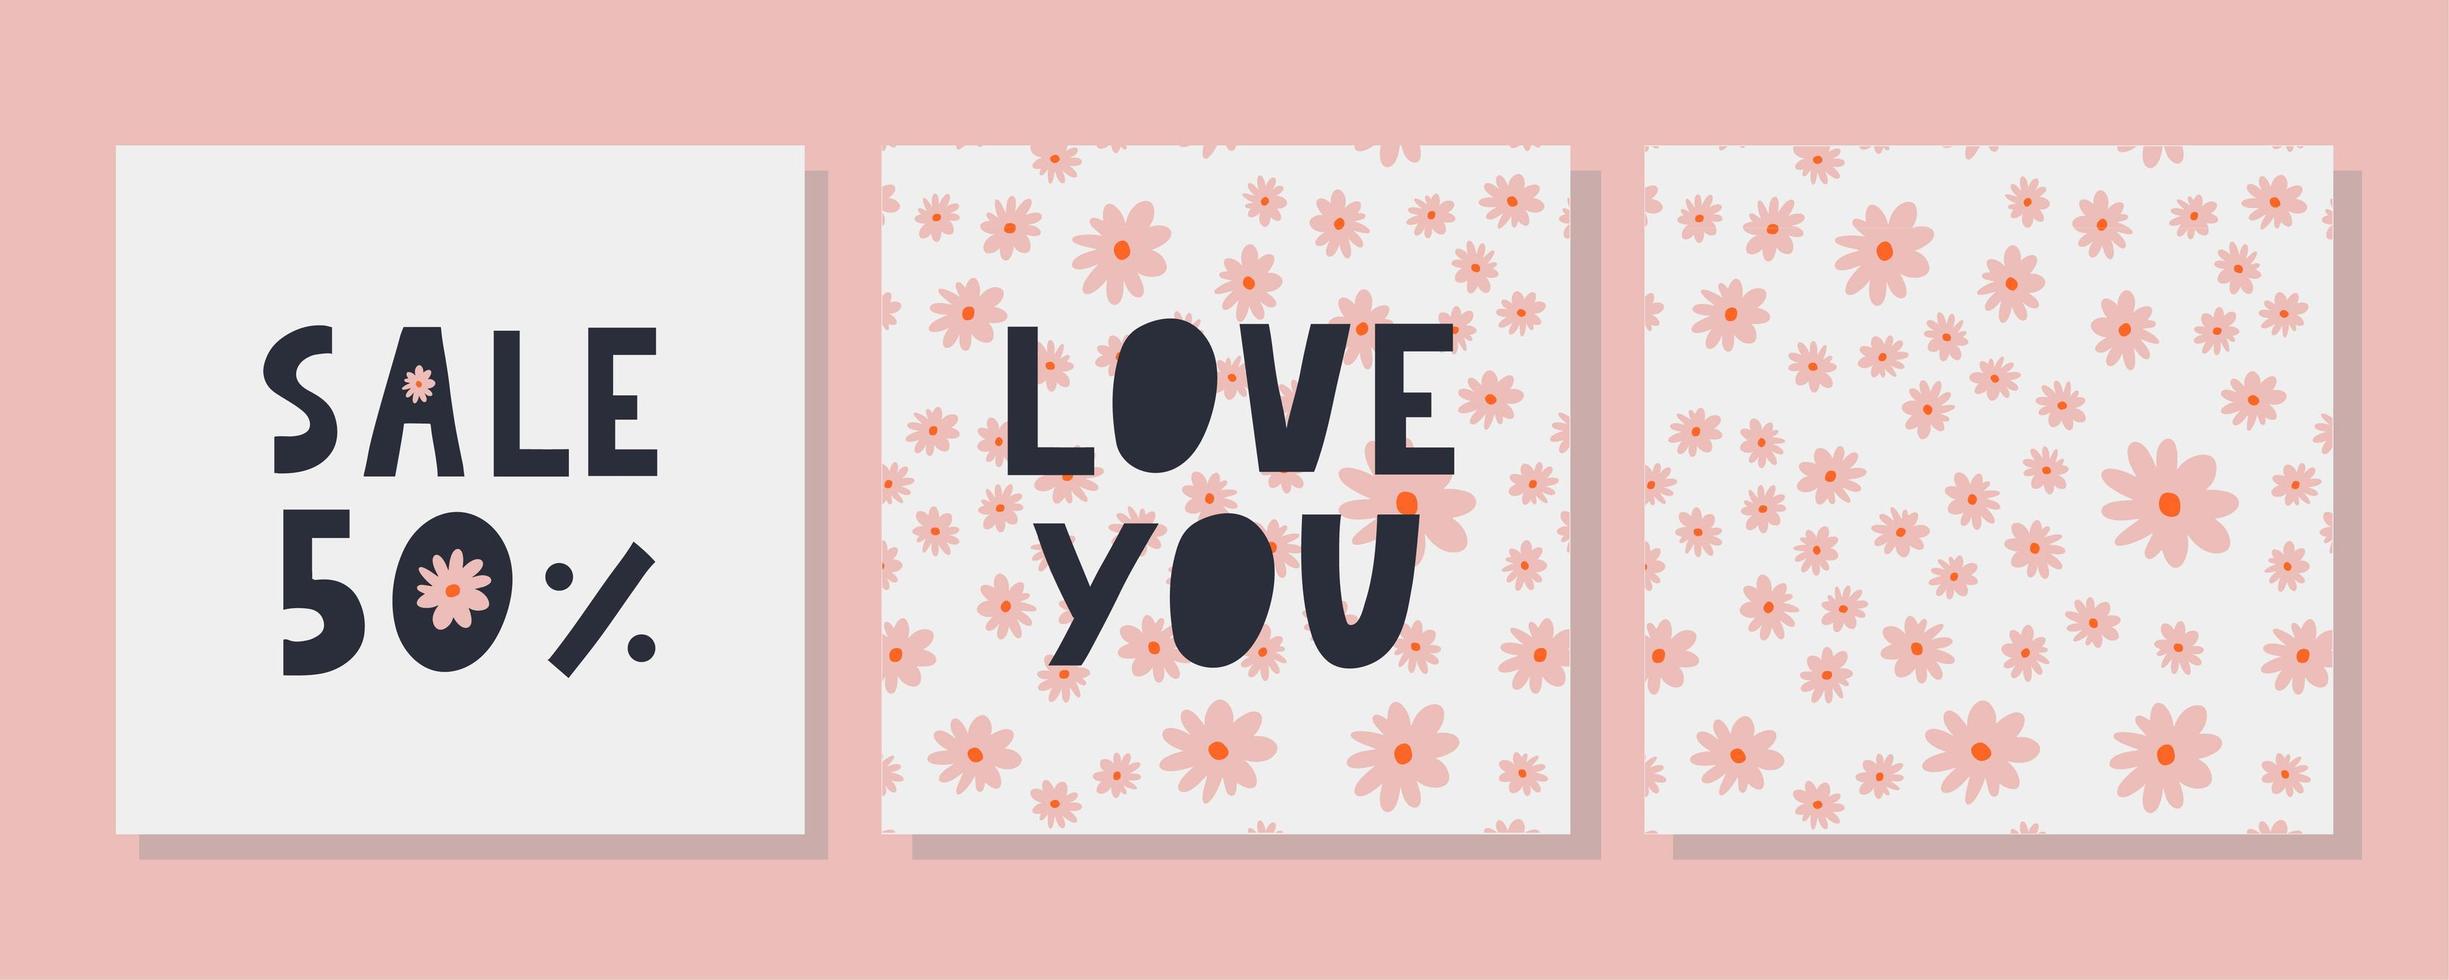 Love you set. Inspirational lettering quote flowers banner. Typography slogan for t shirt printing, graphic design. vector